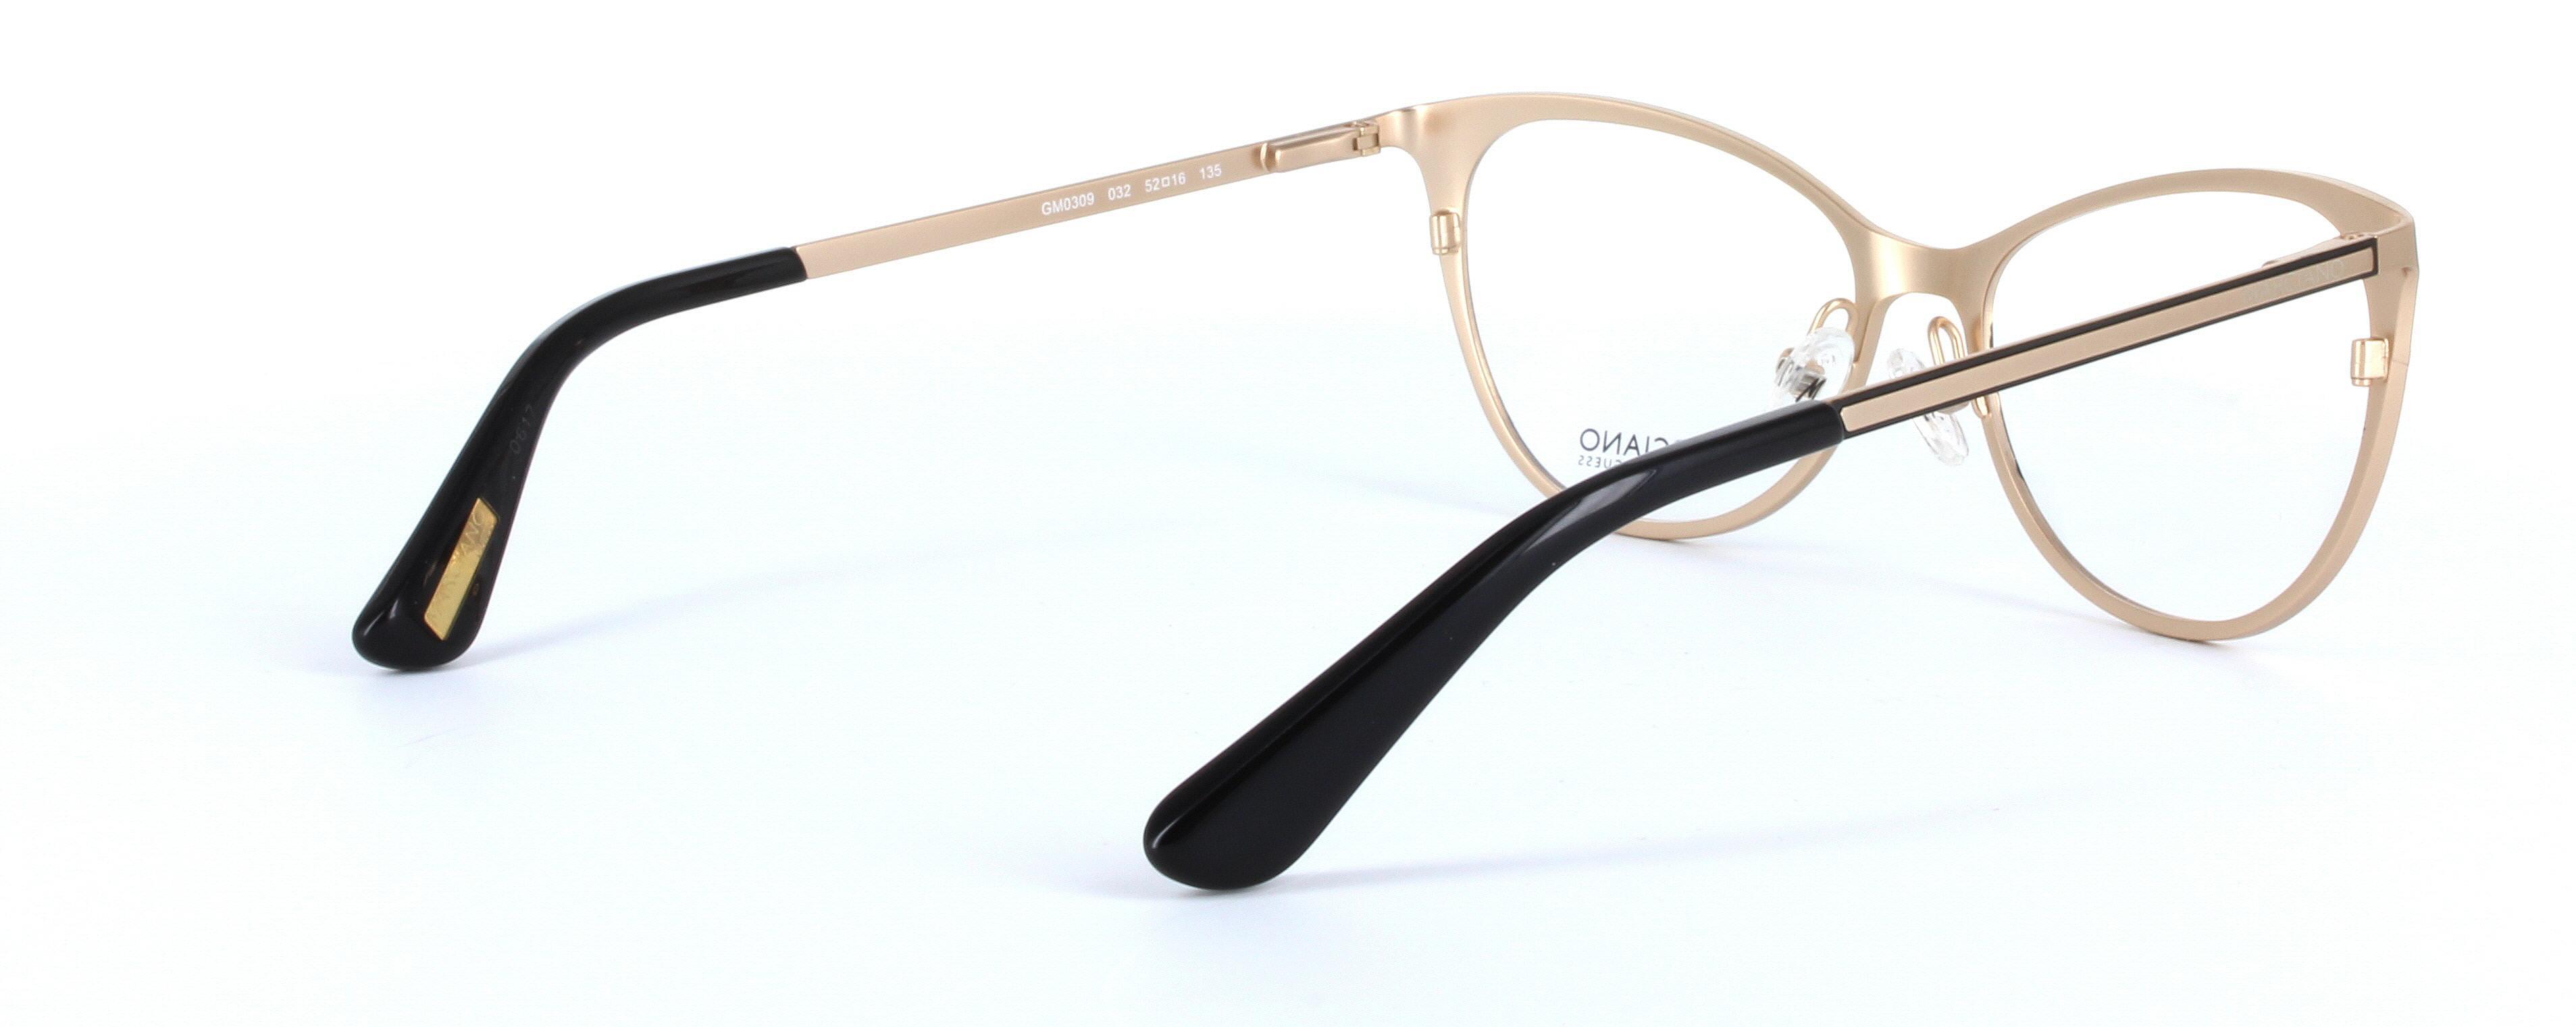 GUESS MARCIANO (GM0309-032) Gold Full Rim Oval Metal Glasses - Image View 4